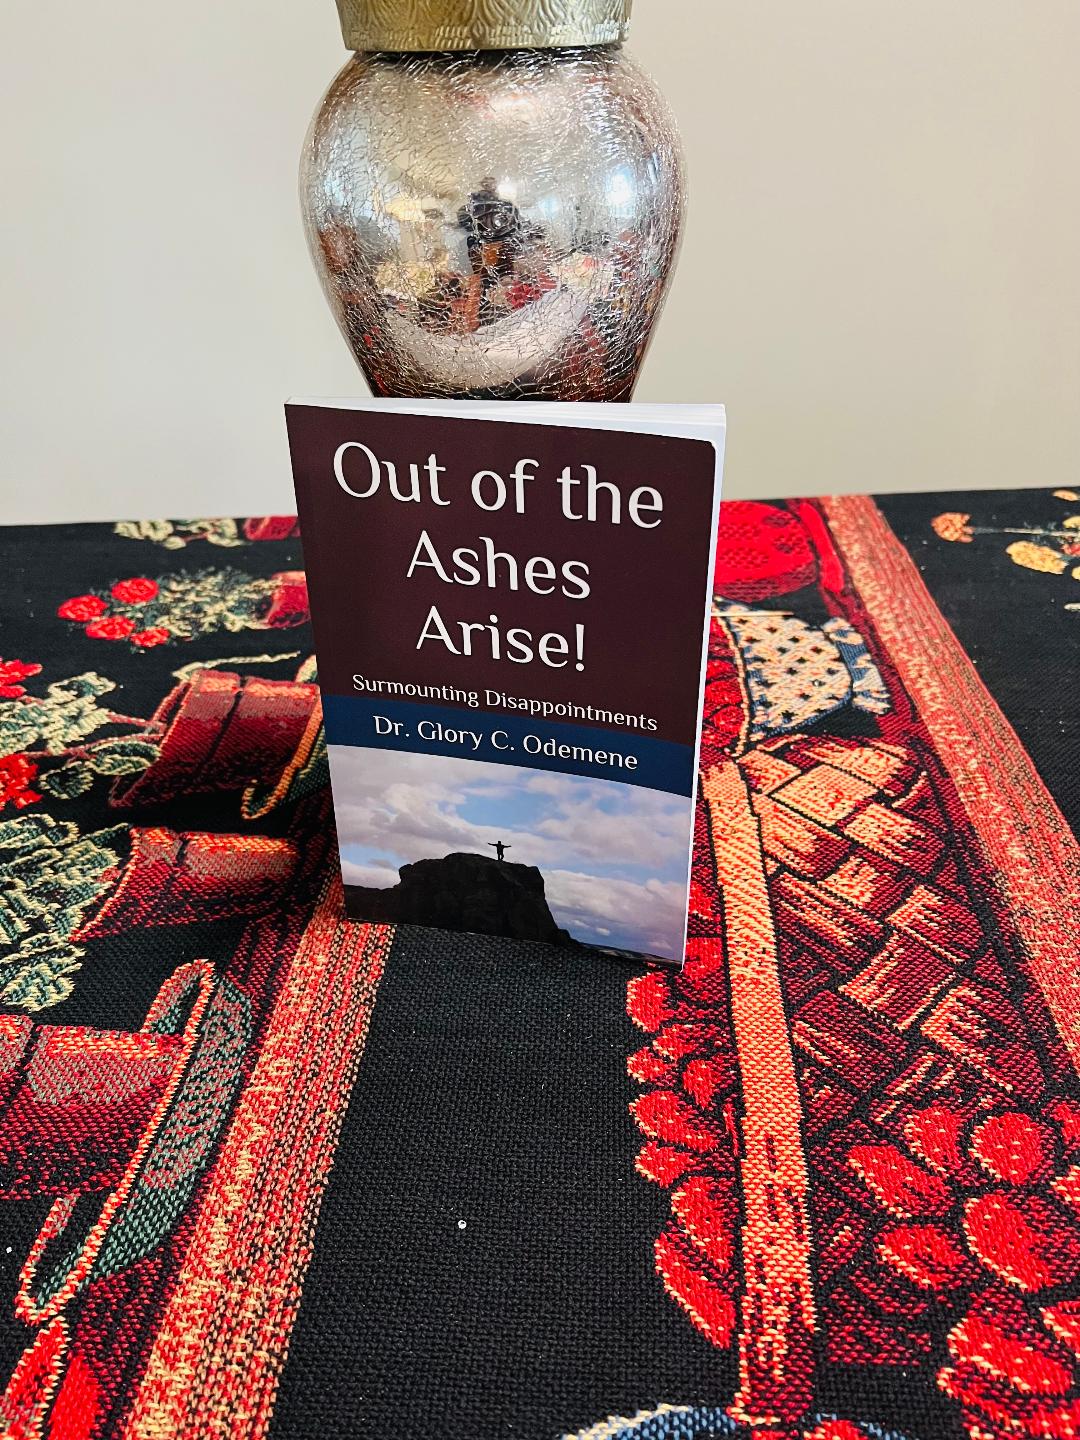 New Book Release: Out of the Ashes Arise!